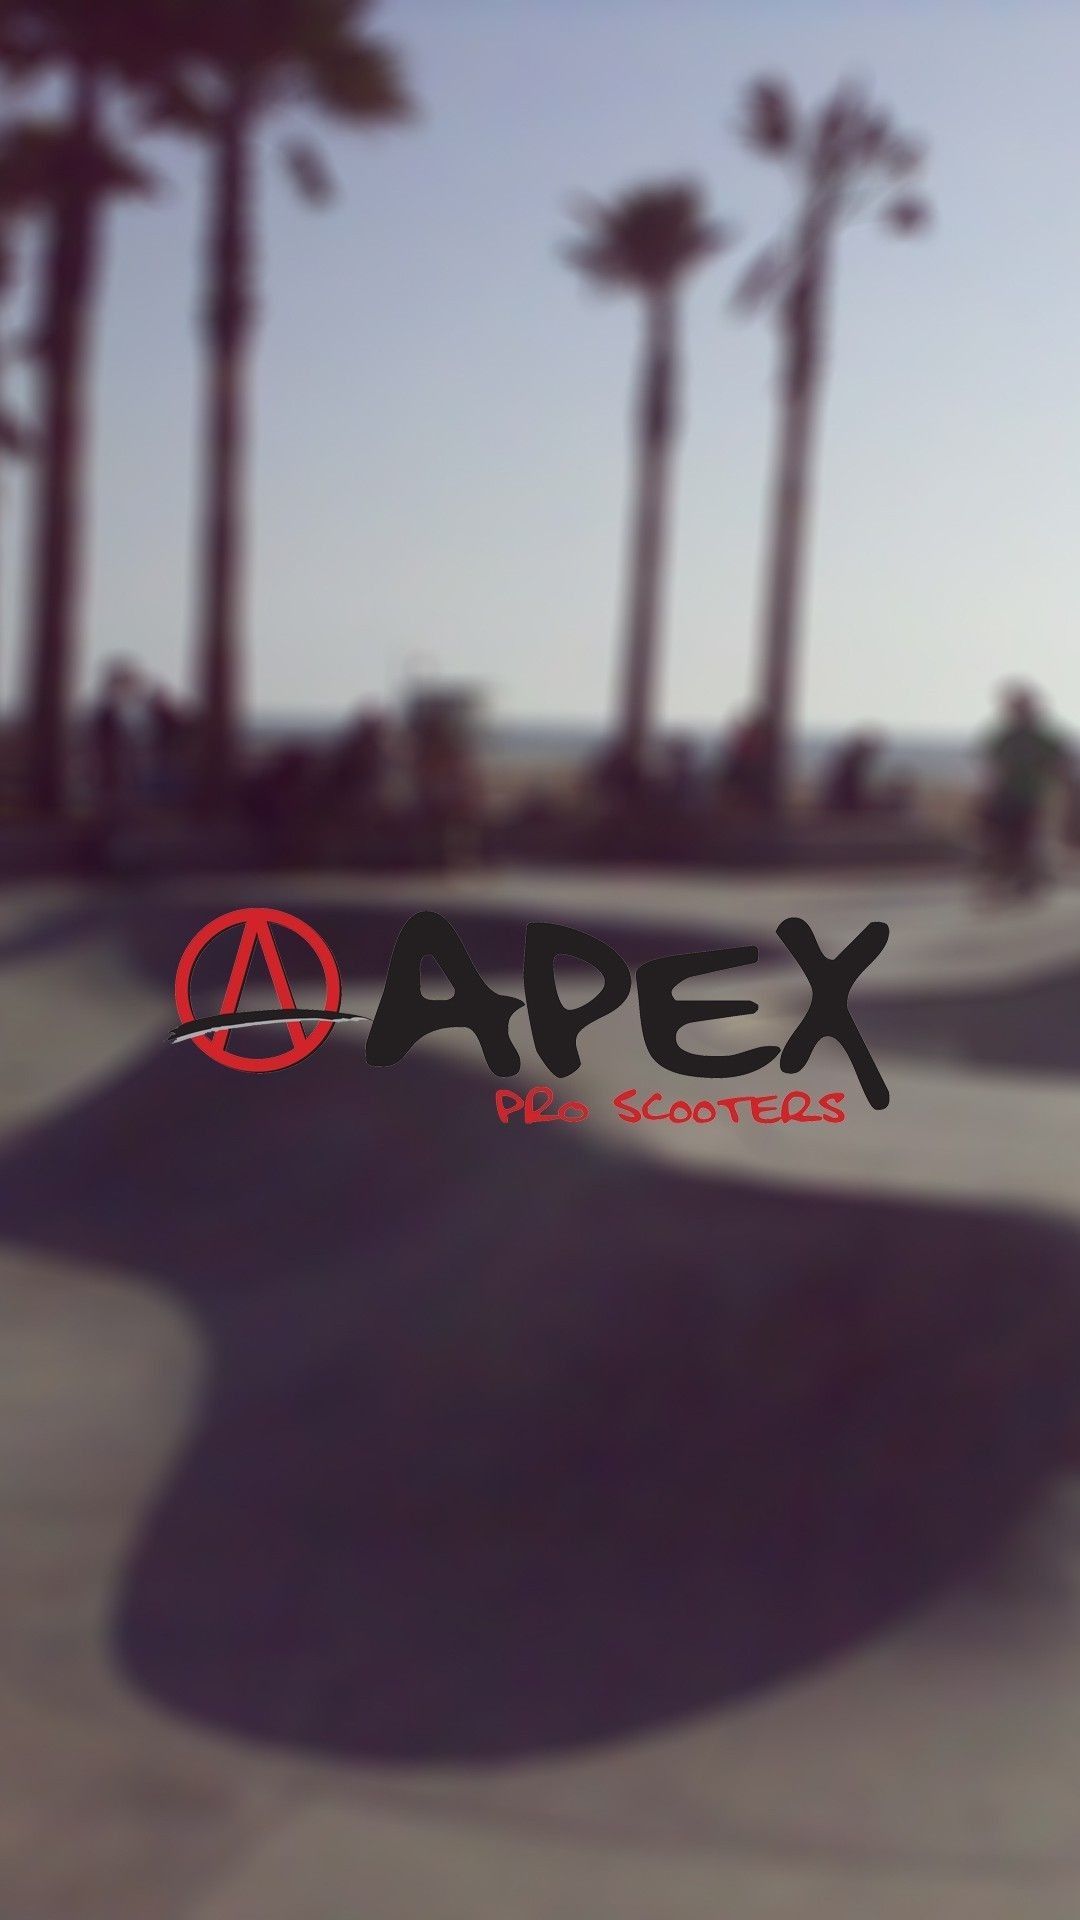 Pro Scooter Wallpaper. Pro scooters, Scooter, Apex scooters